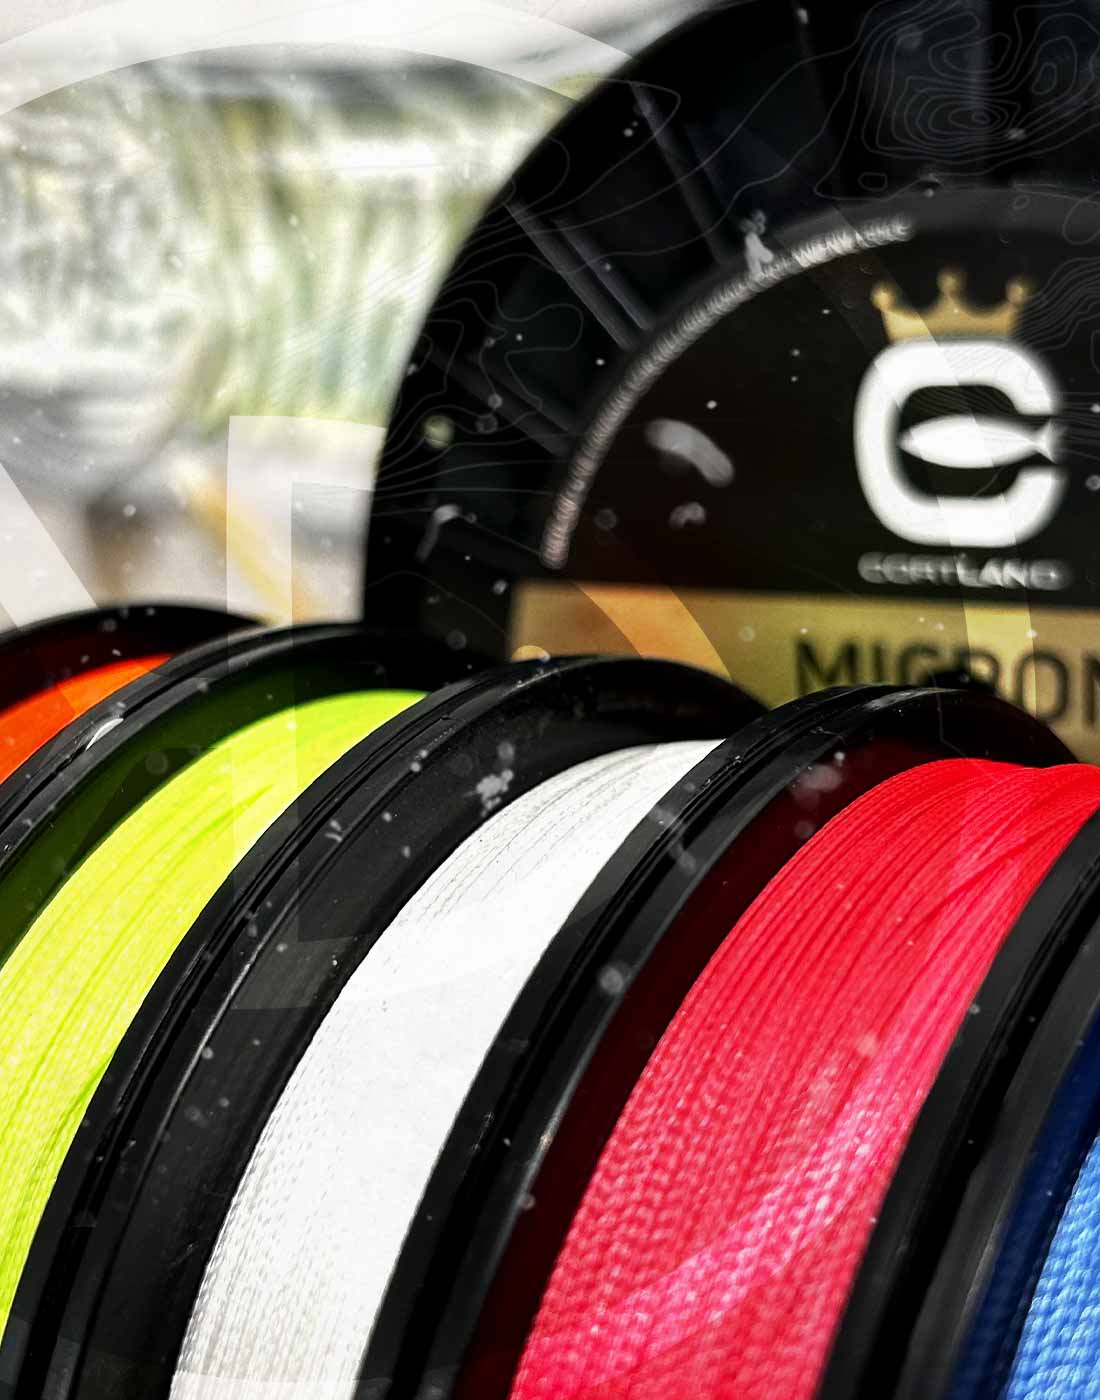 Side view of 5 different spools of Cortland Fly Fishing Backing